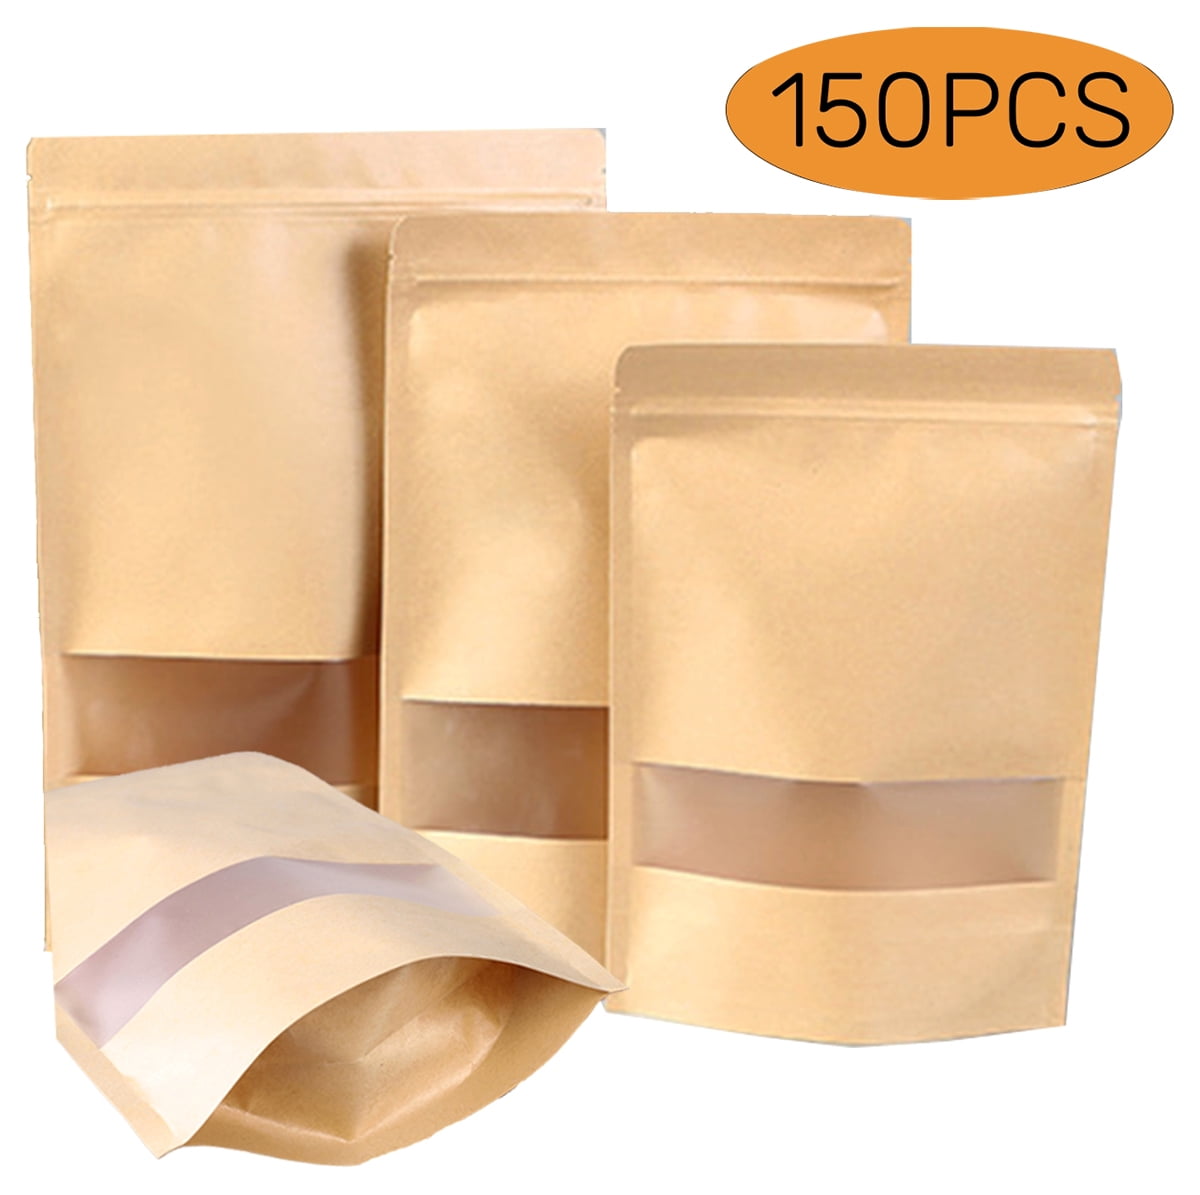 LZLPACKING Kraft Stand Up Pouches bags 100 Pcs,Brown Resealable Bags with  Window for Home or Business,Coffee Bags,Zip Lock Food Storage Bags,Sealable